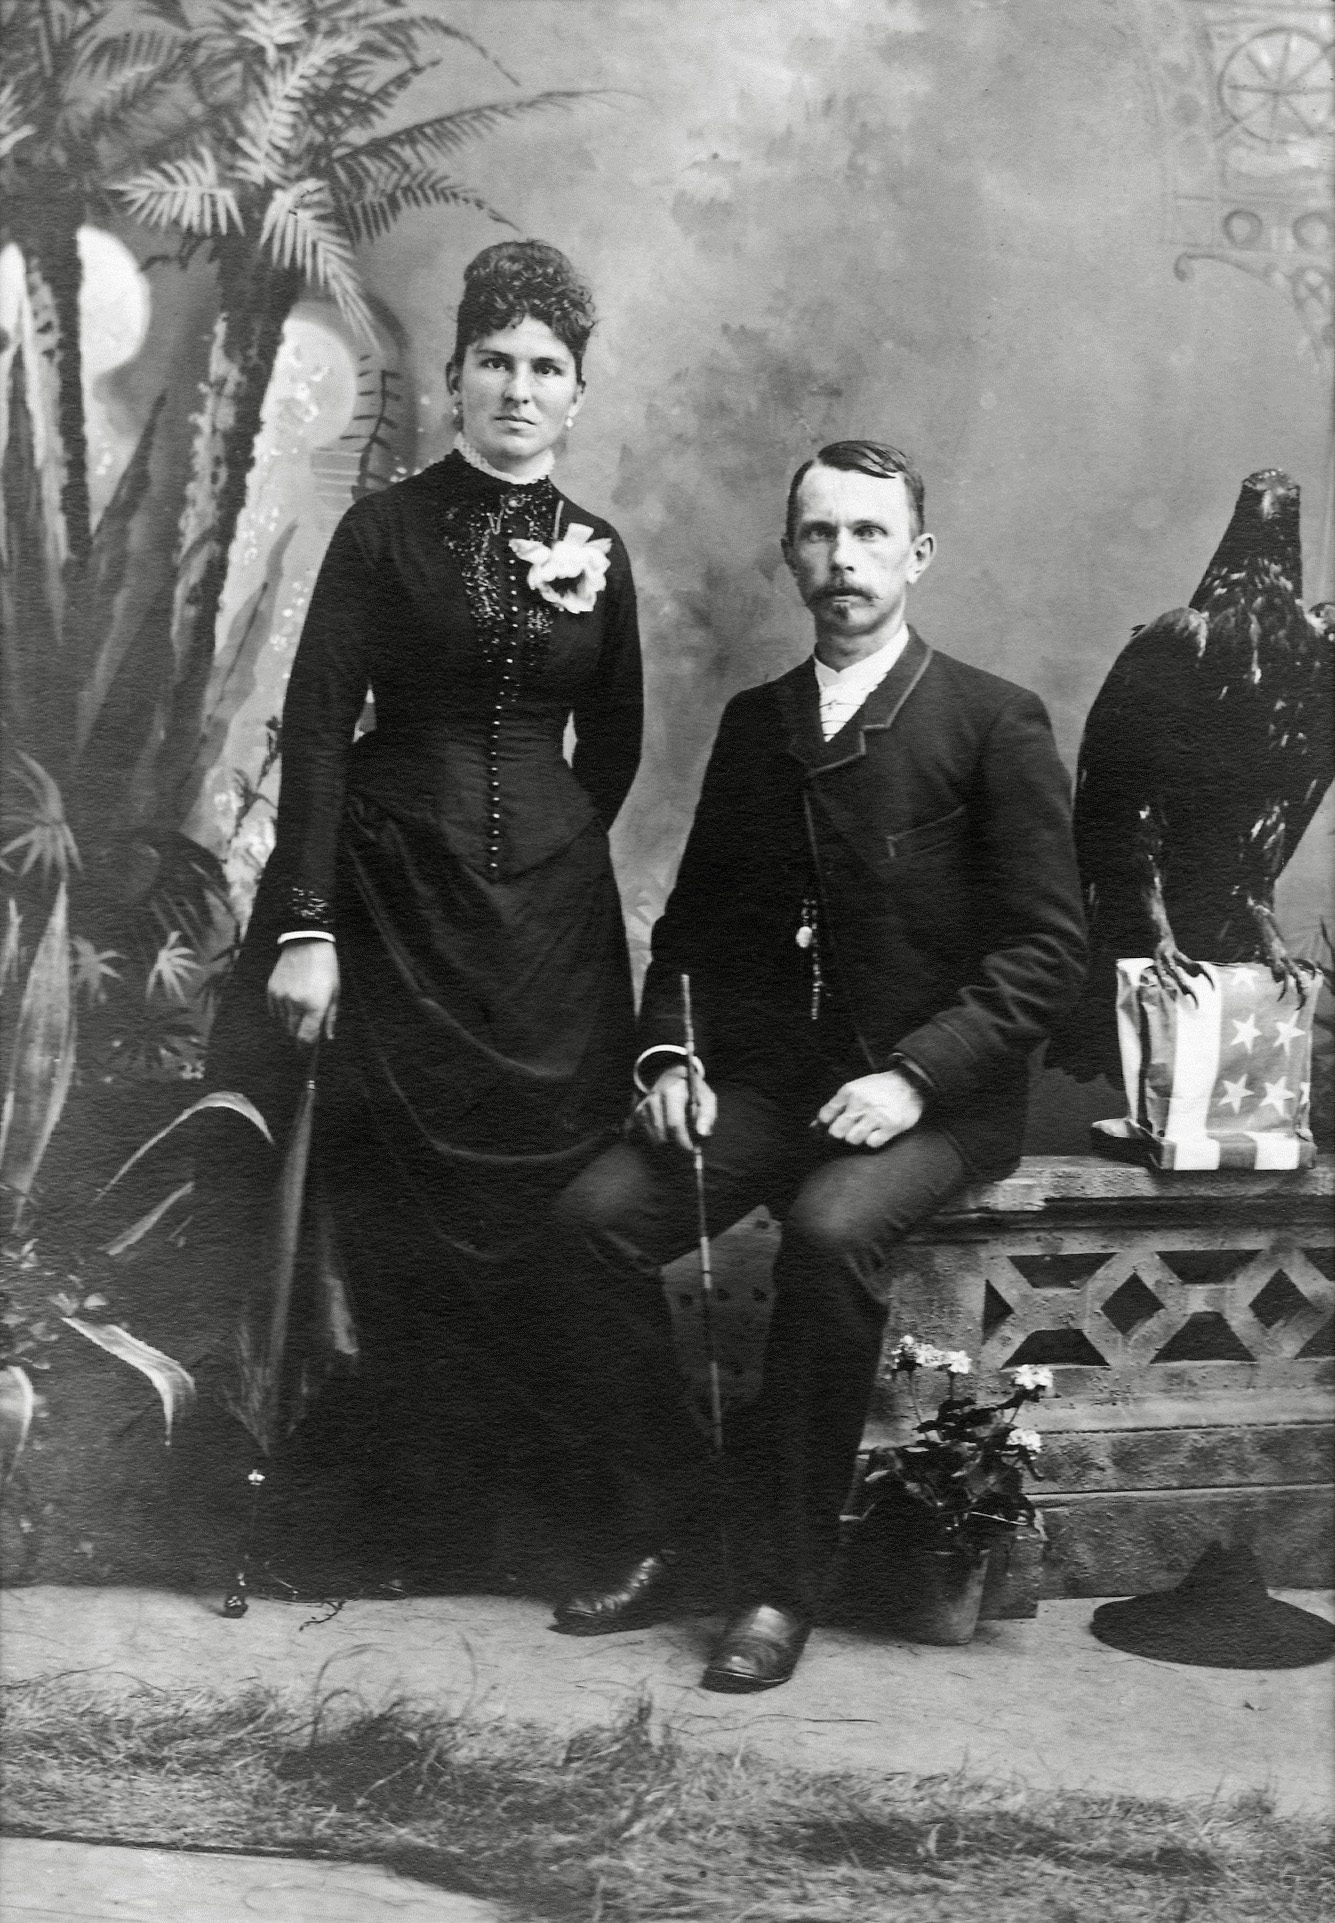 My great-great-grandparents Fred and Emma Schubert in their wedding photo, taken April 13, 1888. Emma was born in Schleswig, Germany on October 7, 1863 and died on June 24, 1912; she was buried in Kiel, Wisconsin. Fred Schubert was born in Lesohwitz bei Goritz, Germany on November 21, 1852. He came to this country with his parents at age nine and settled in Sheboygan, Wisconsin where later he became a wagon maker. In 1880, however, he entered a partnership with his brother Paul Schubert and started a photo studio in Kiel, Chilton and New Holstein. He continued the partnership until the time of his death. They also went on to have six children. All my photos are those of the Schubert Bros. studio. View full size.